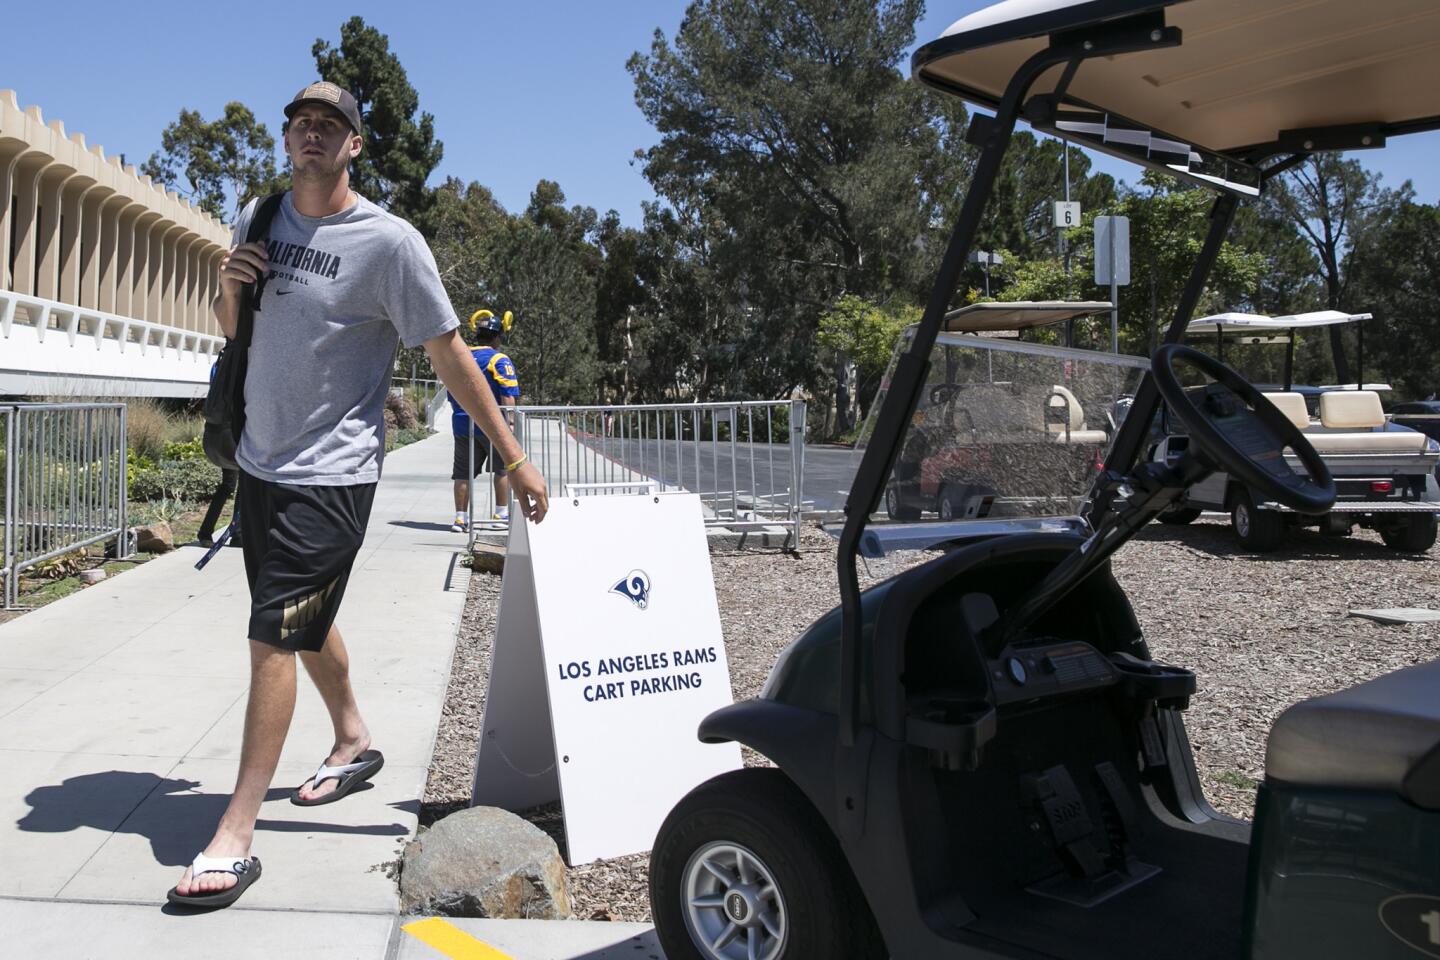 Quarterback Jared Goff heads to the locker room after arriving at the Rams' training camp at UC Irvine.